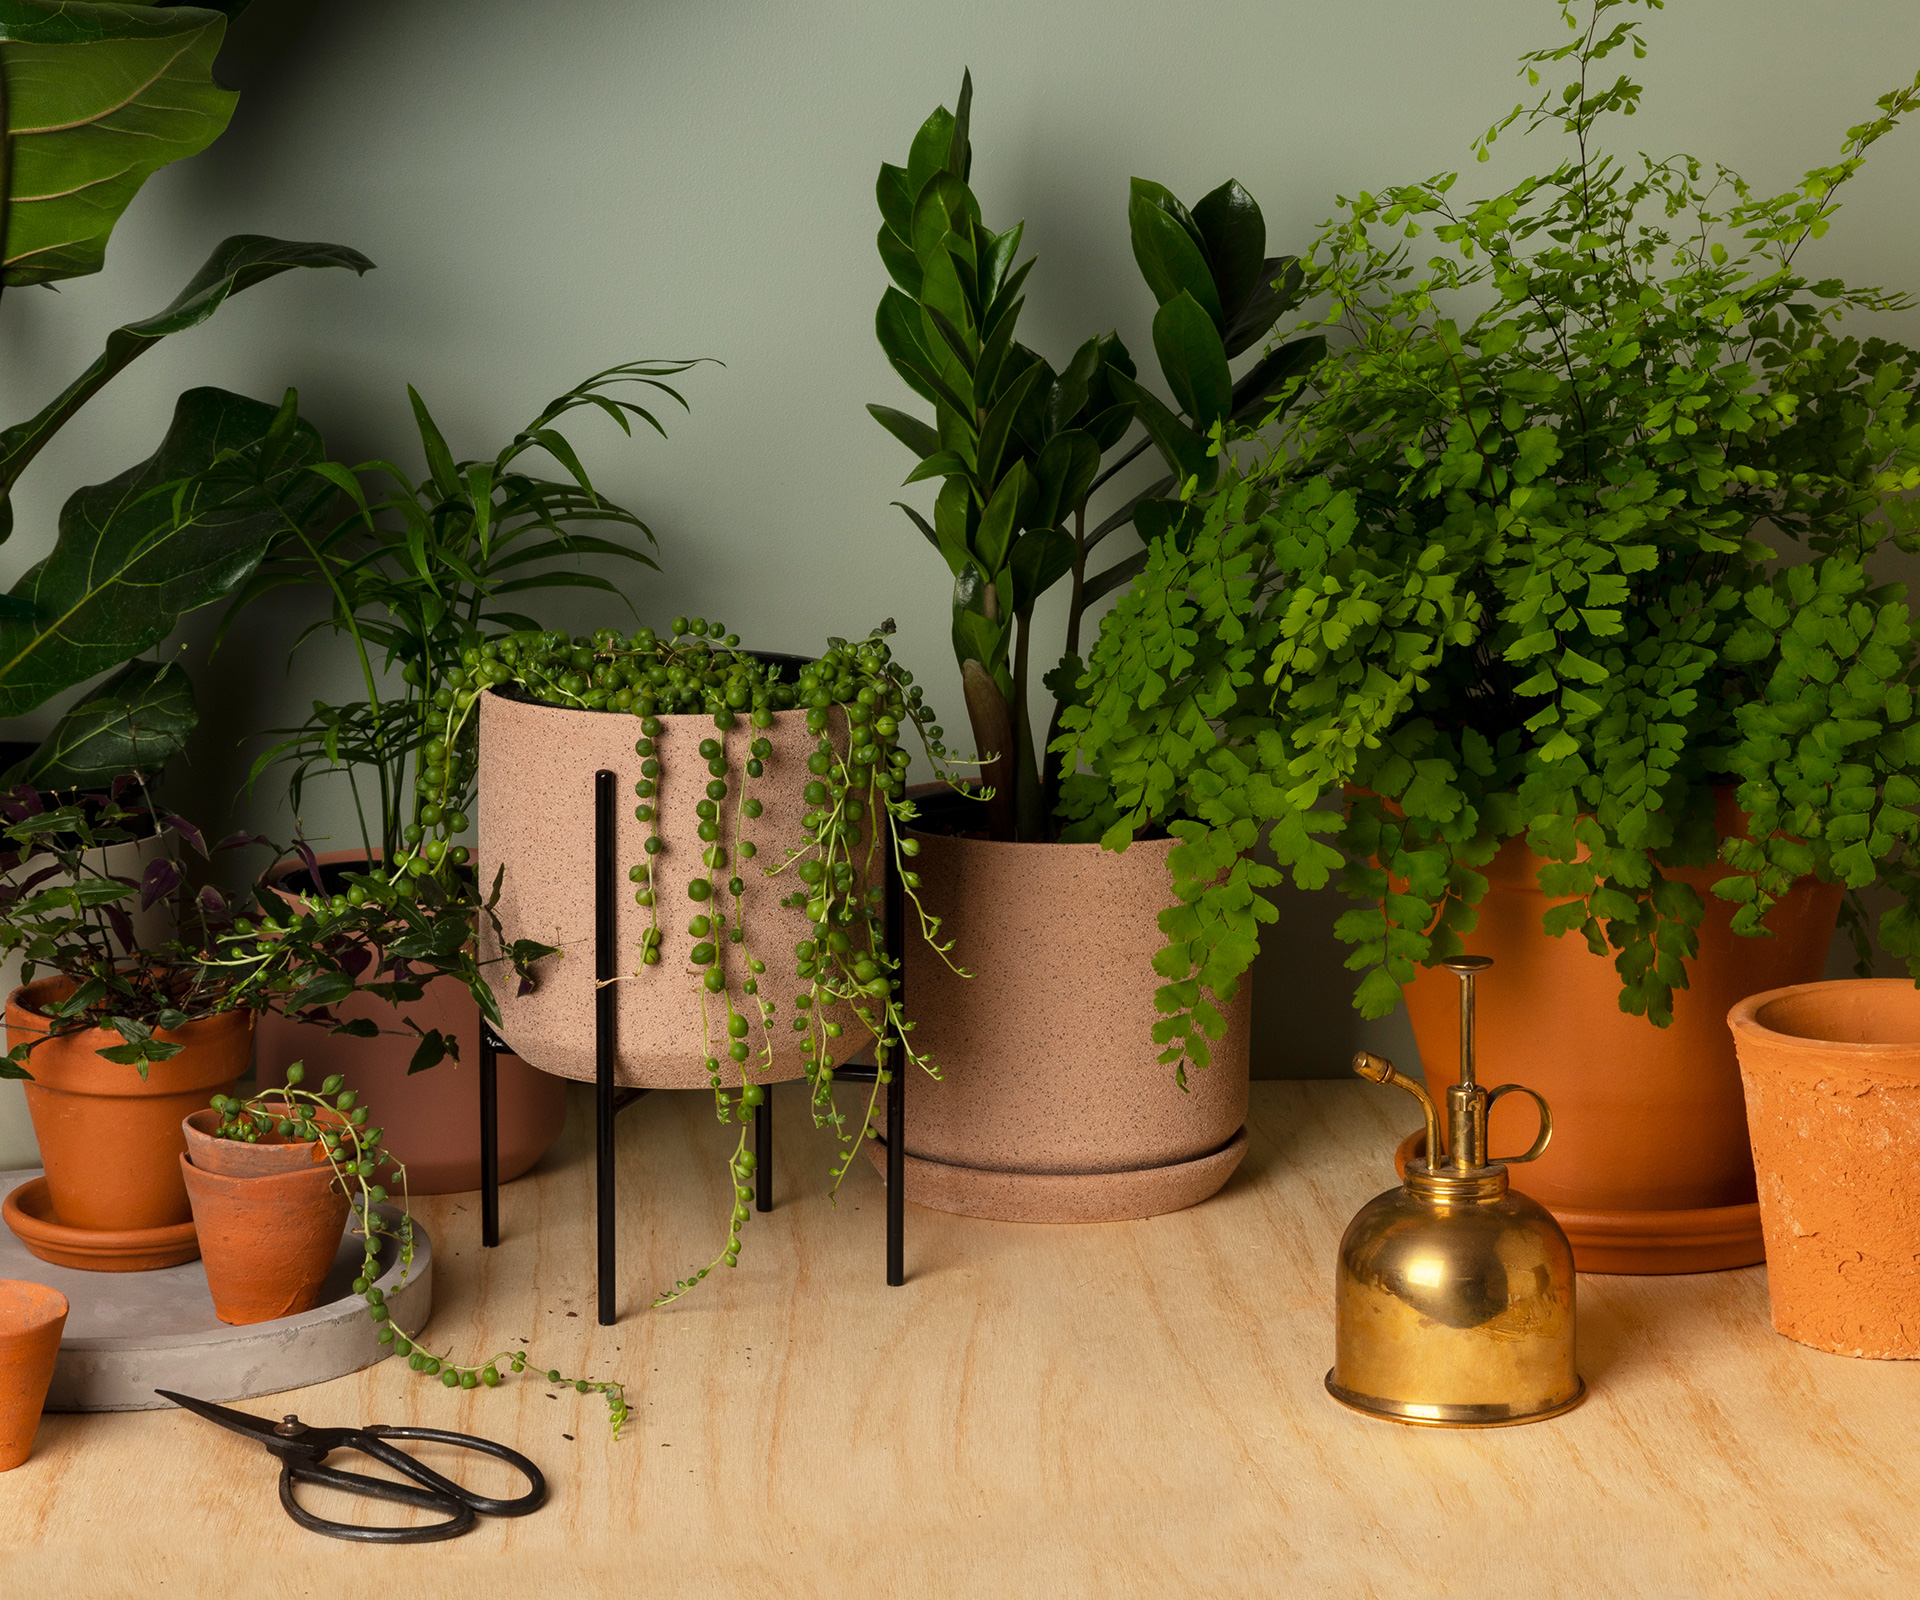 What is the best plant to grow indoors?